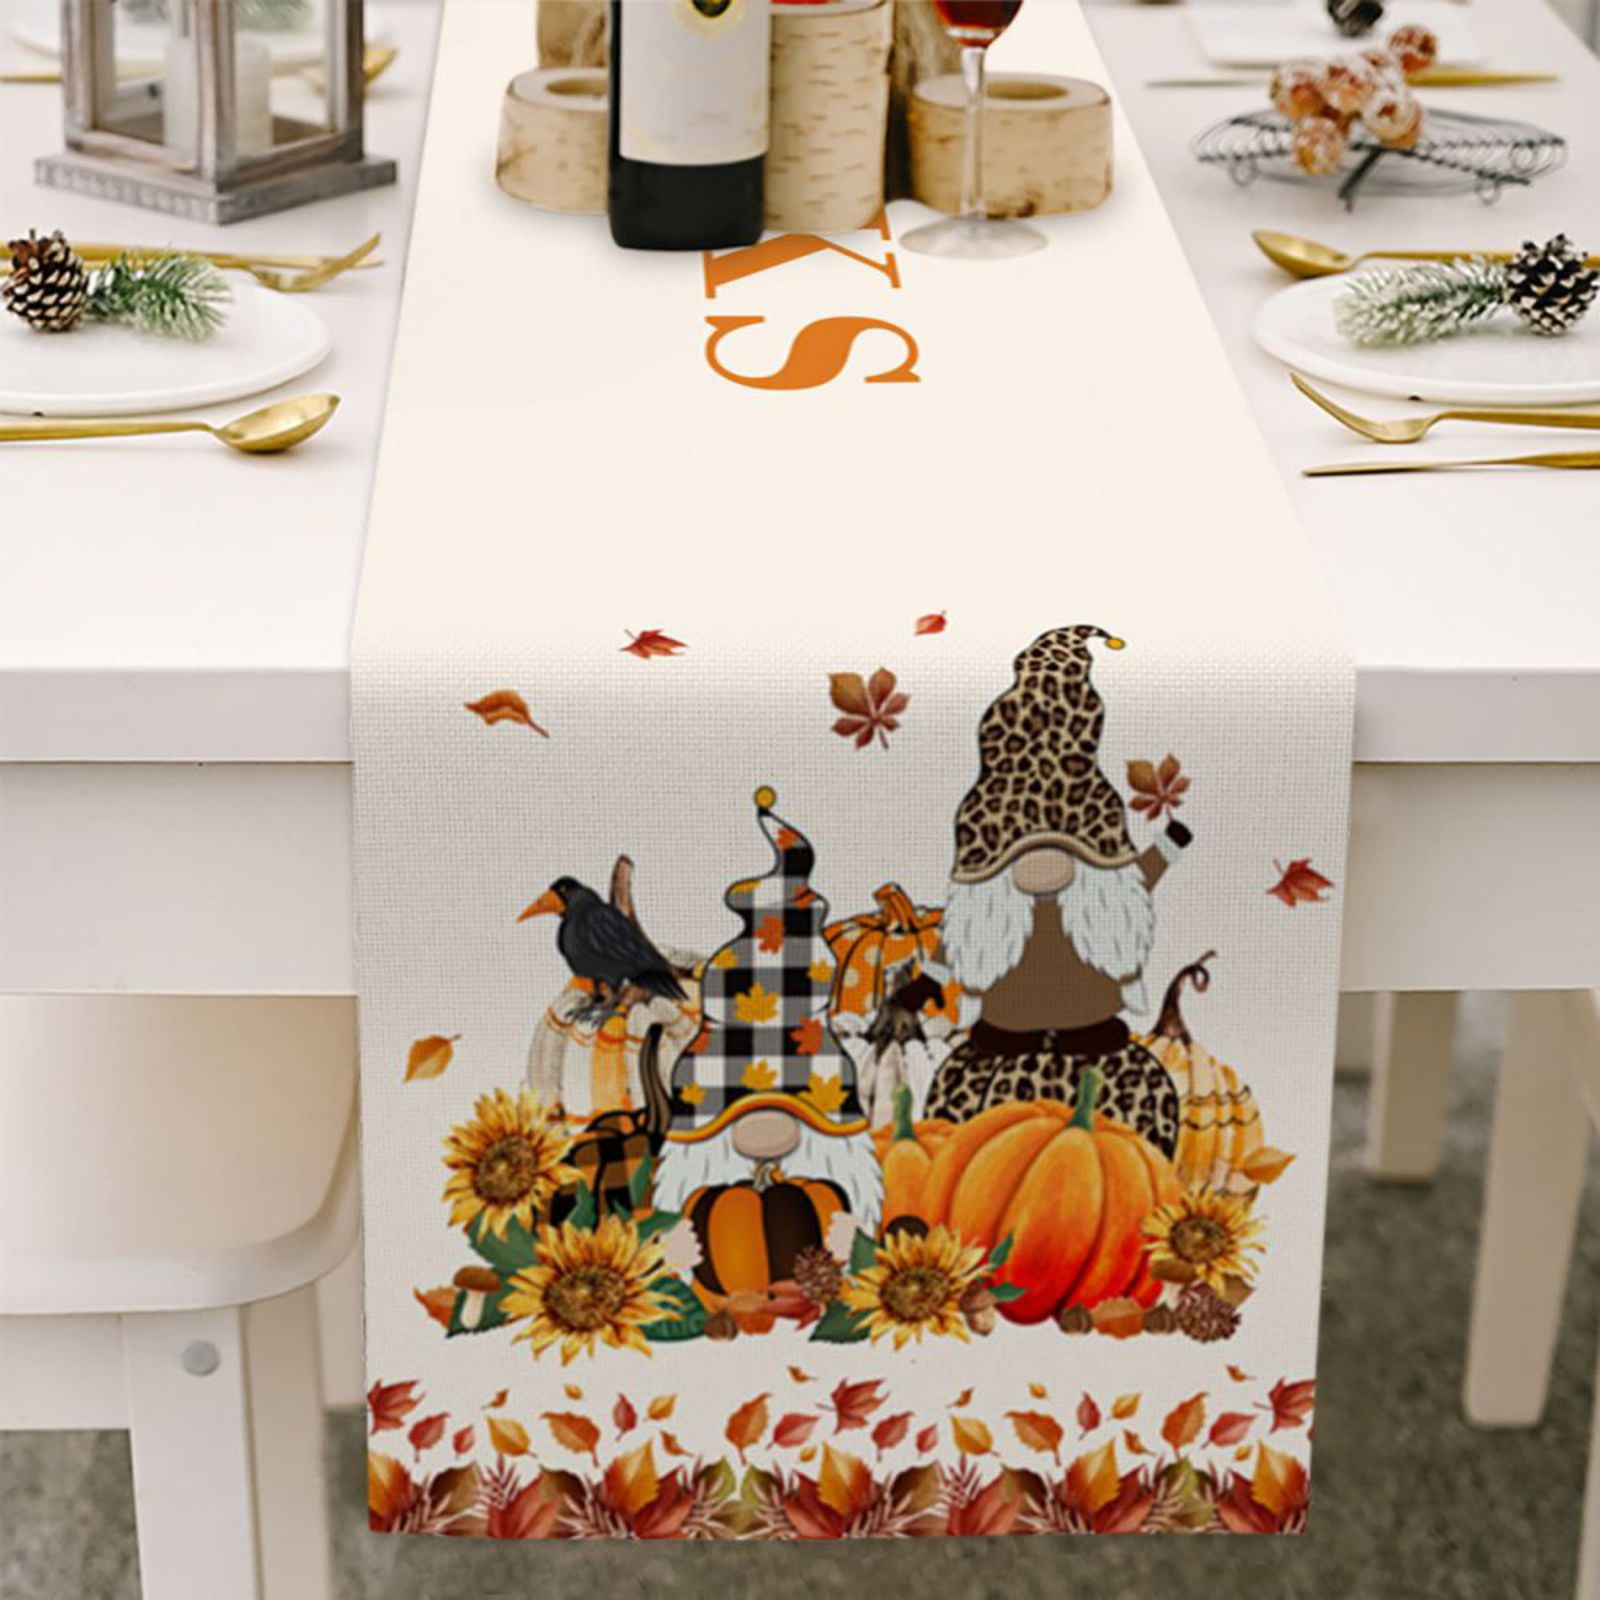 Christmas Gnome Table Runners For Kitchen Decor 13x70 Inch